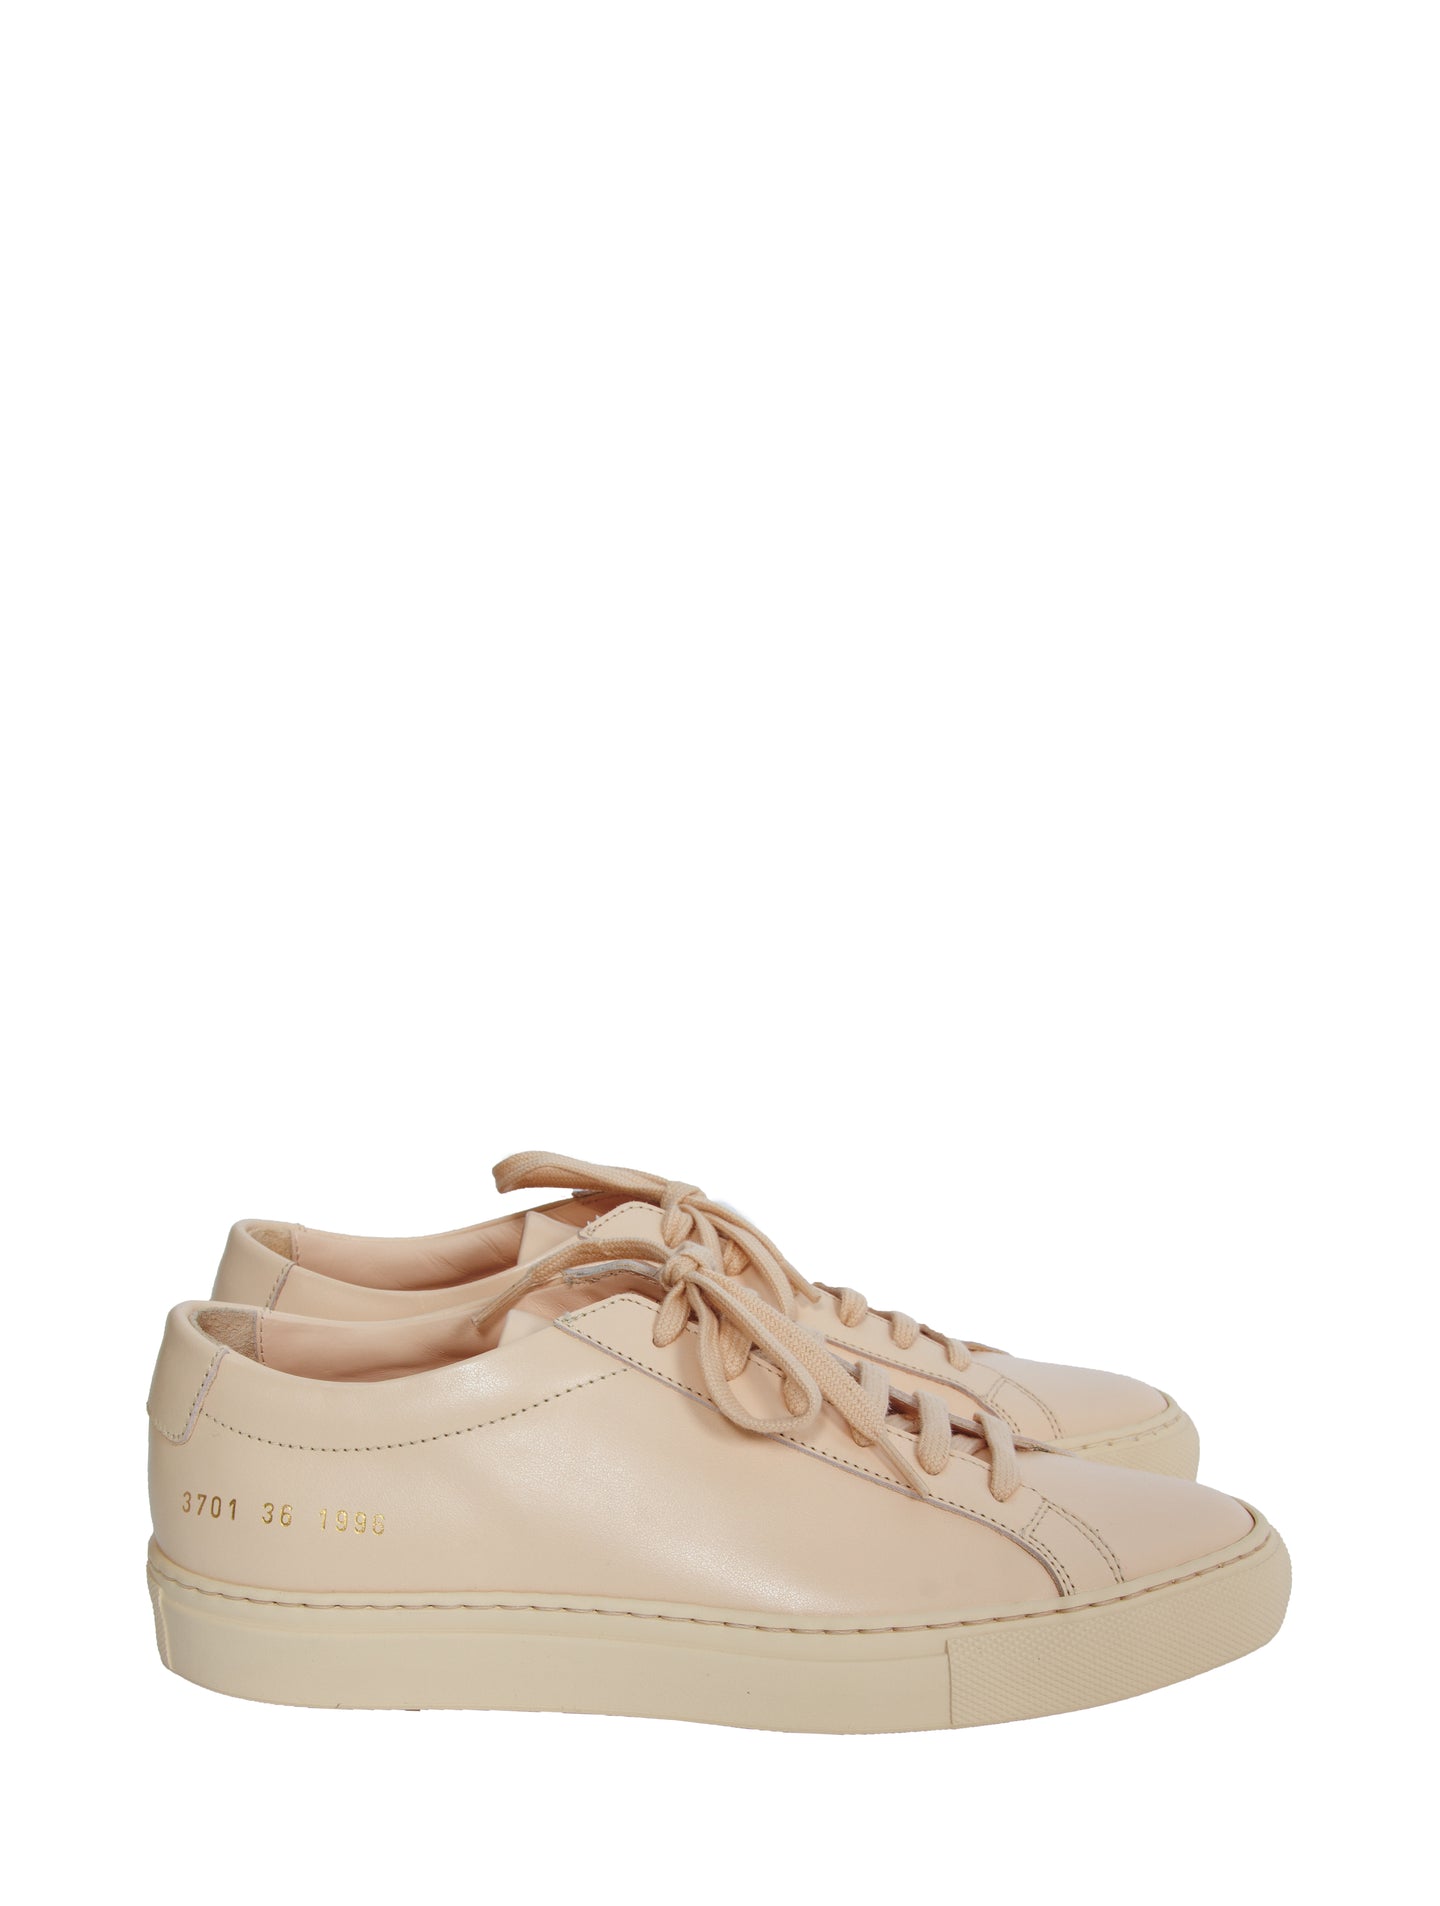 Common Projects Low Apricot